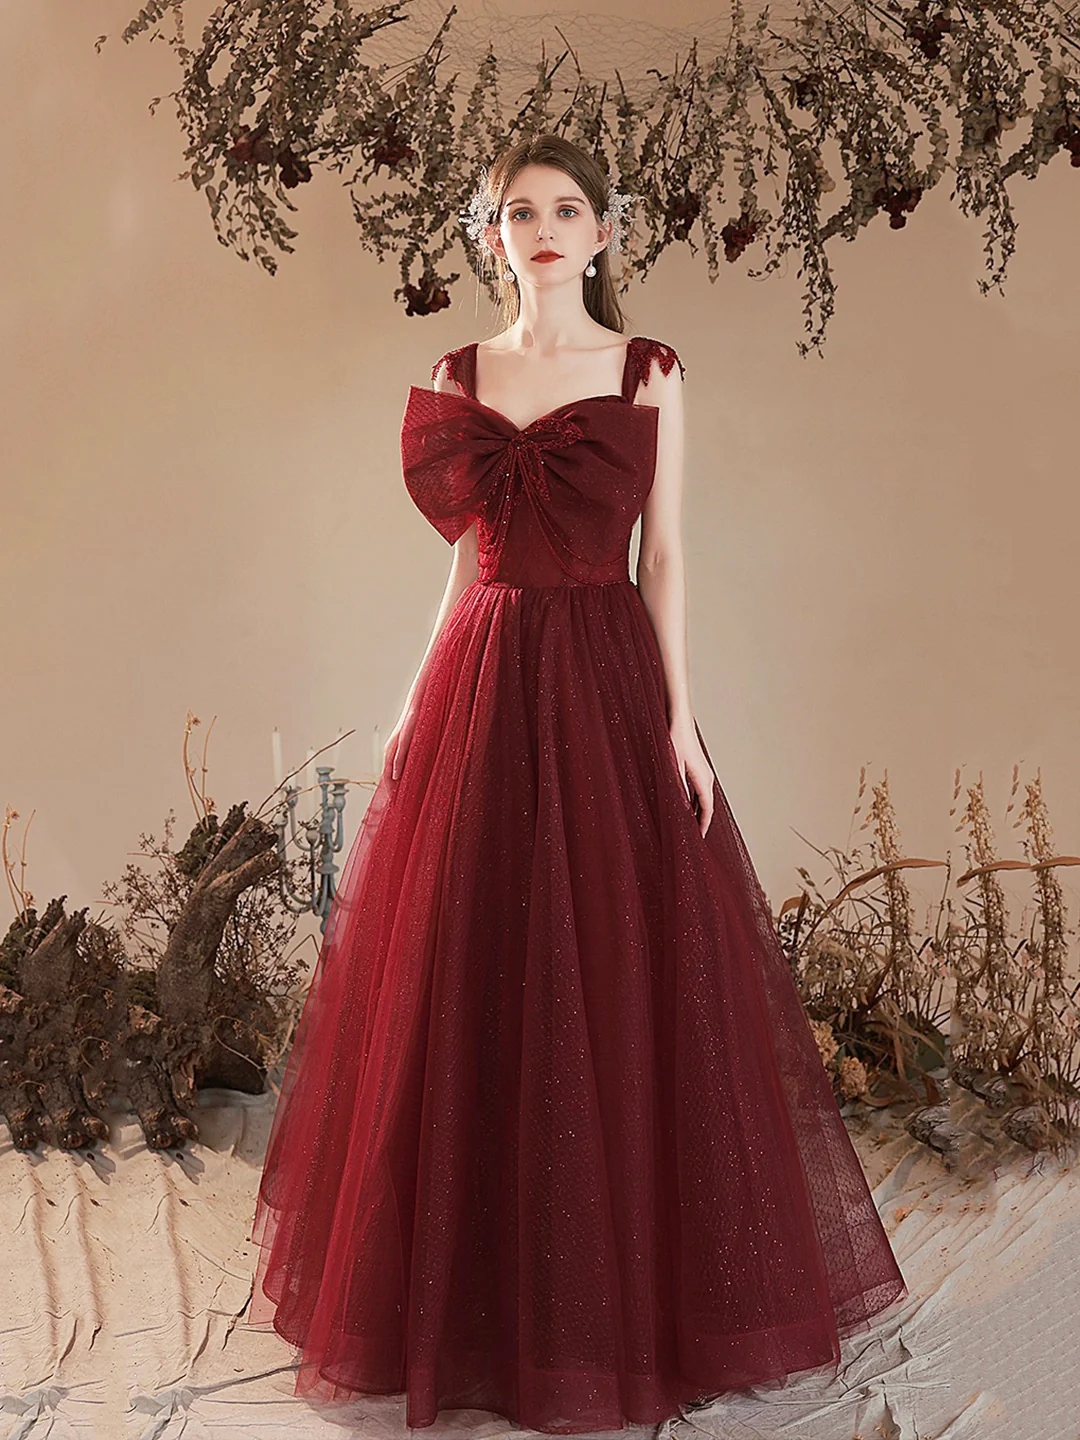 Simple A Line Burgundy Tulle Long Prom Dress With Bow